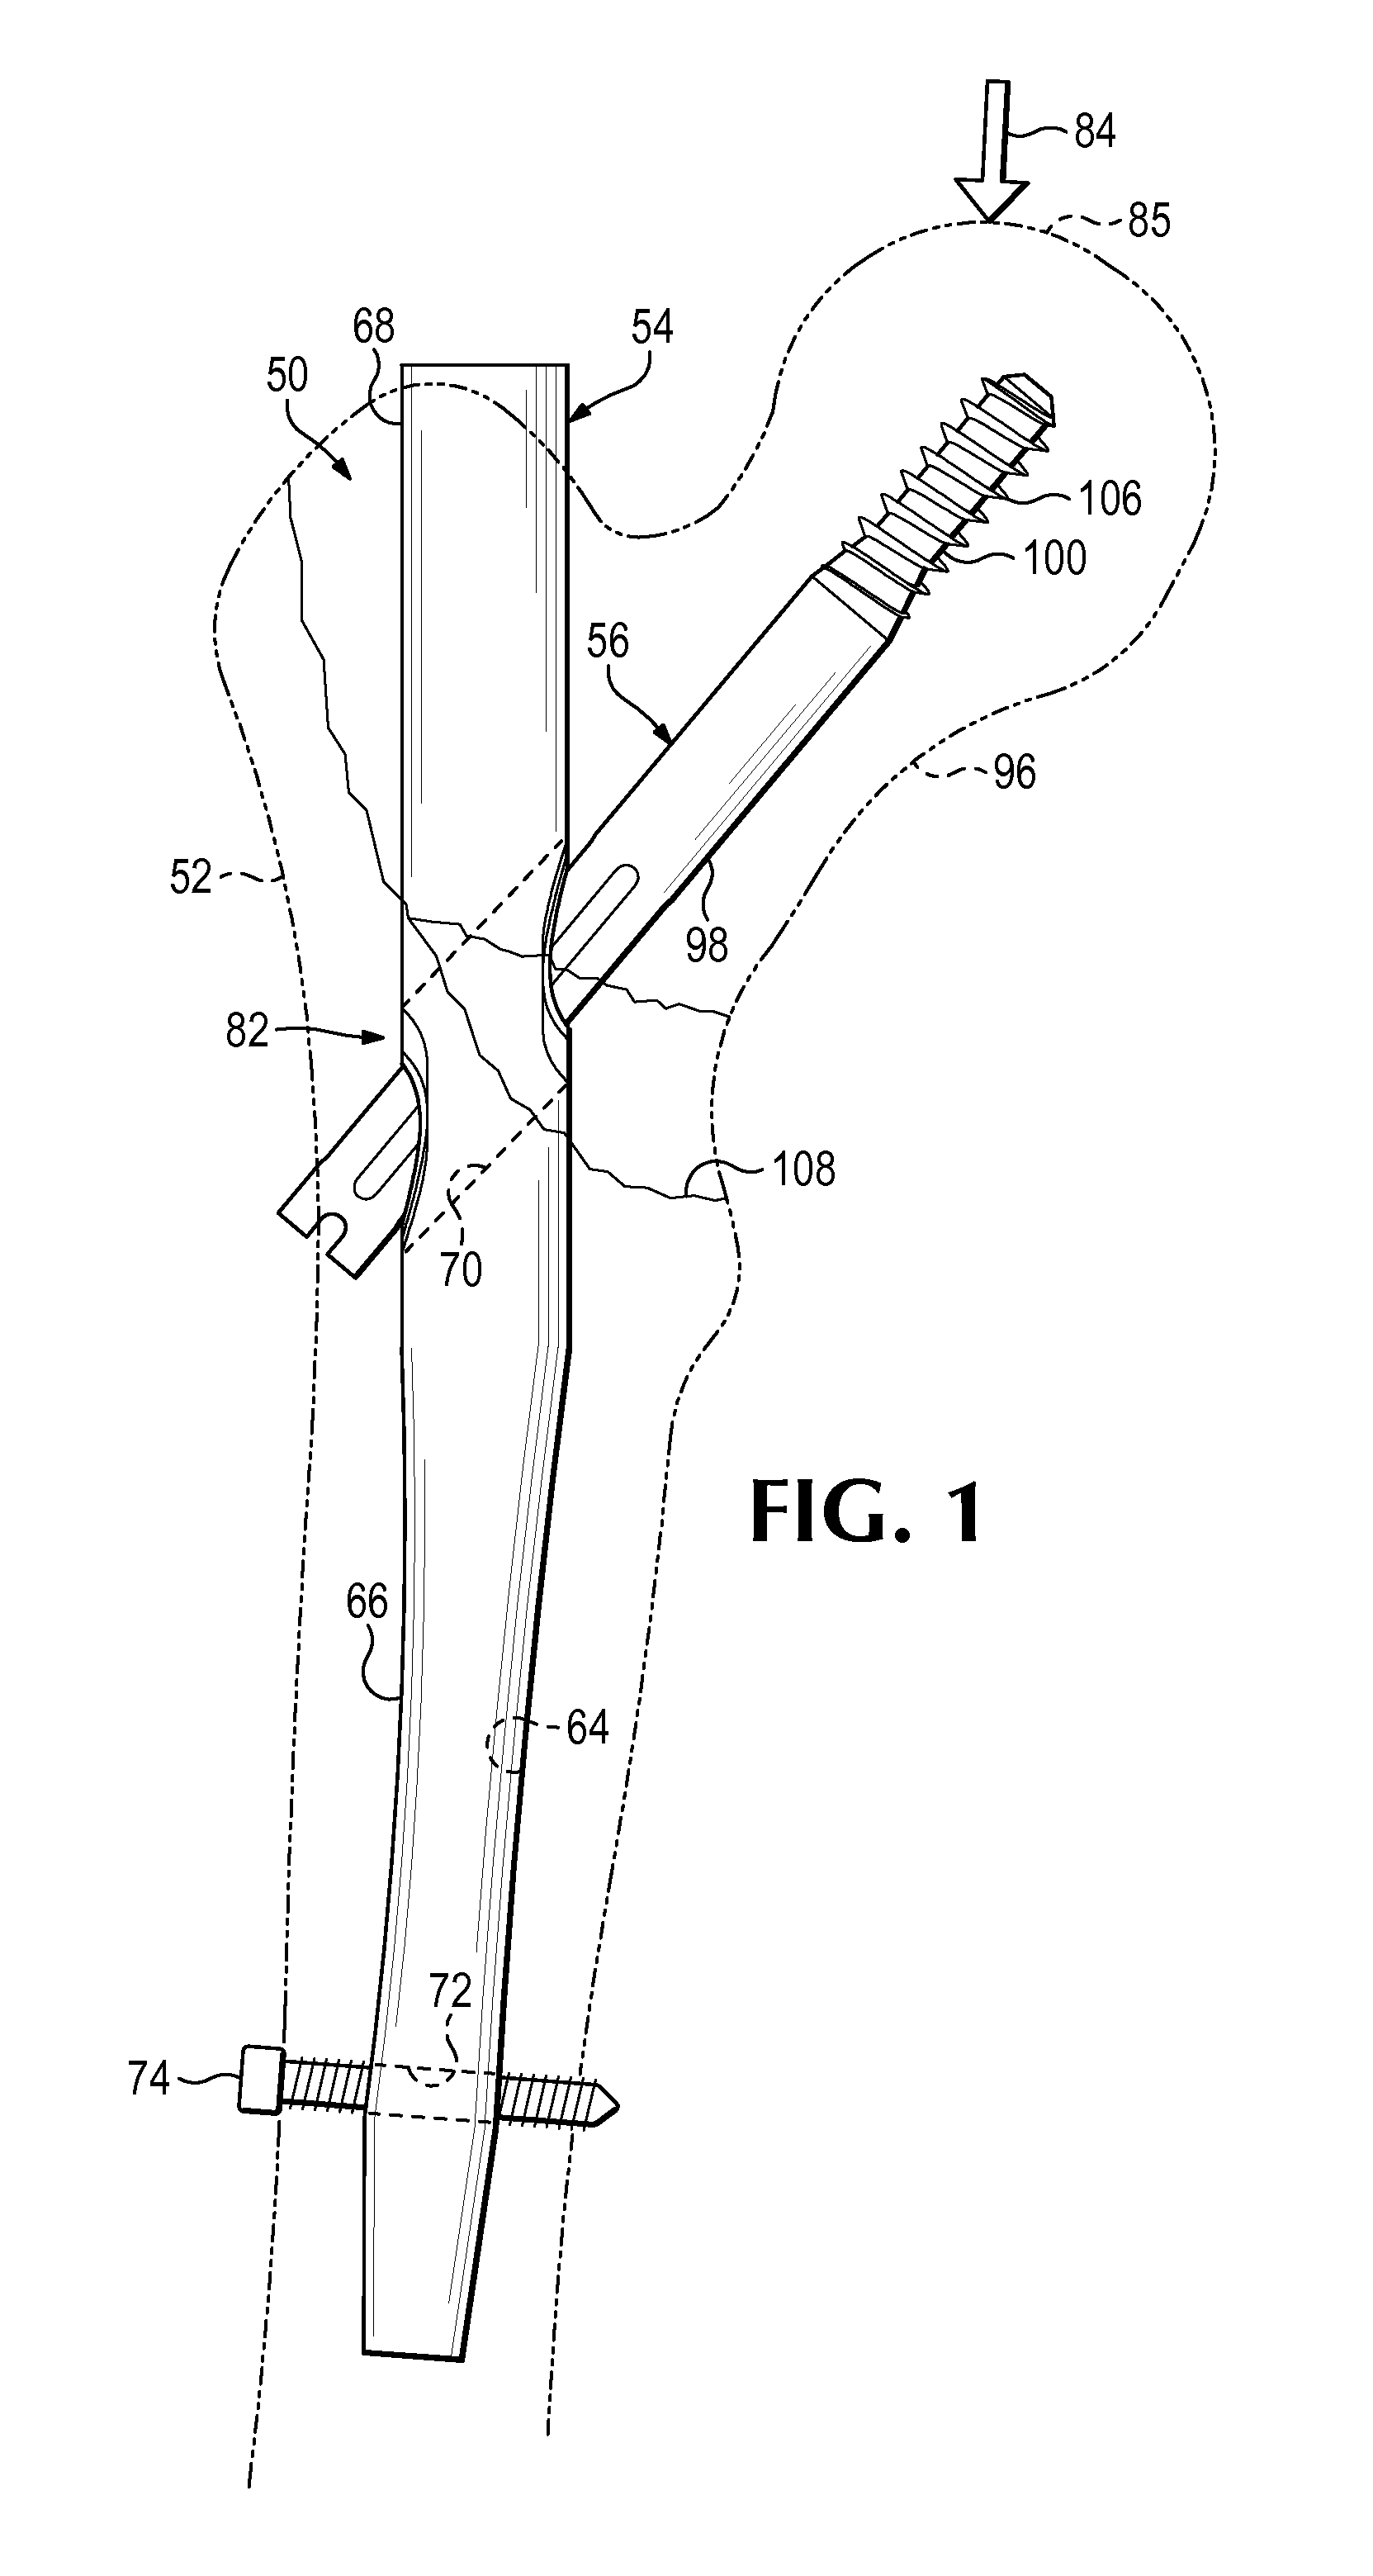 Nail-based compliant hip fixation system